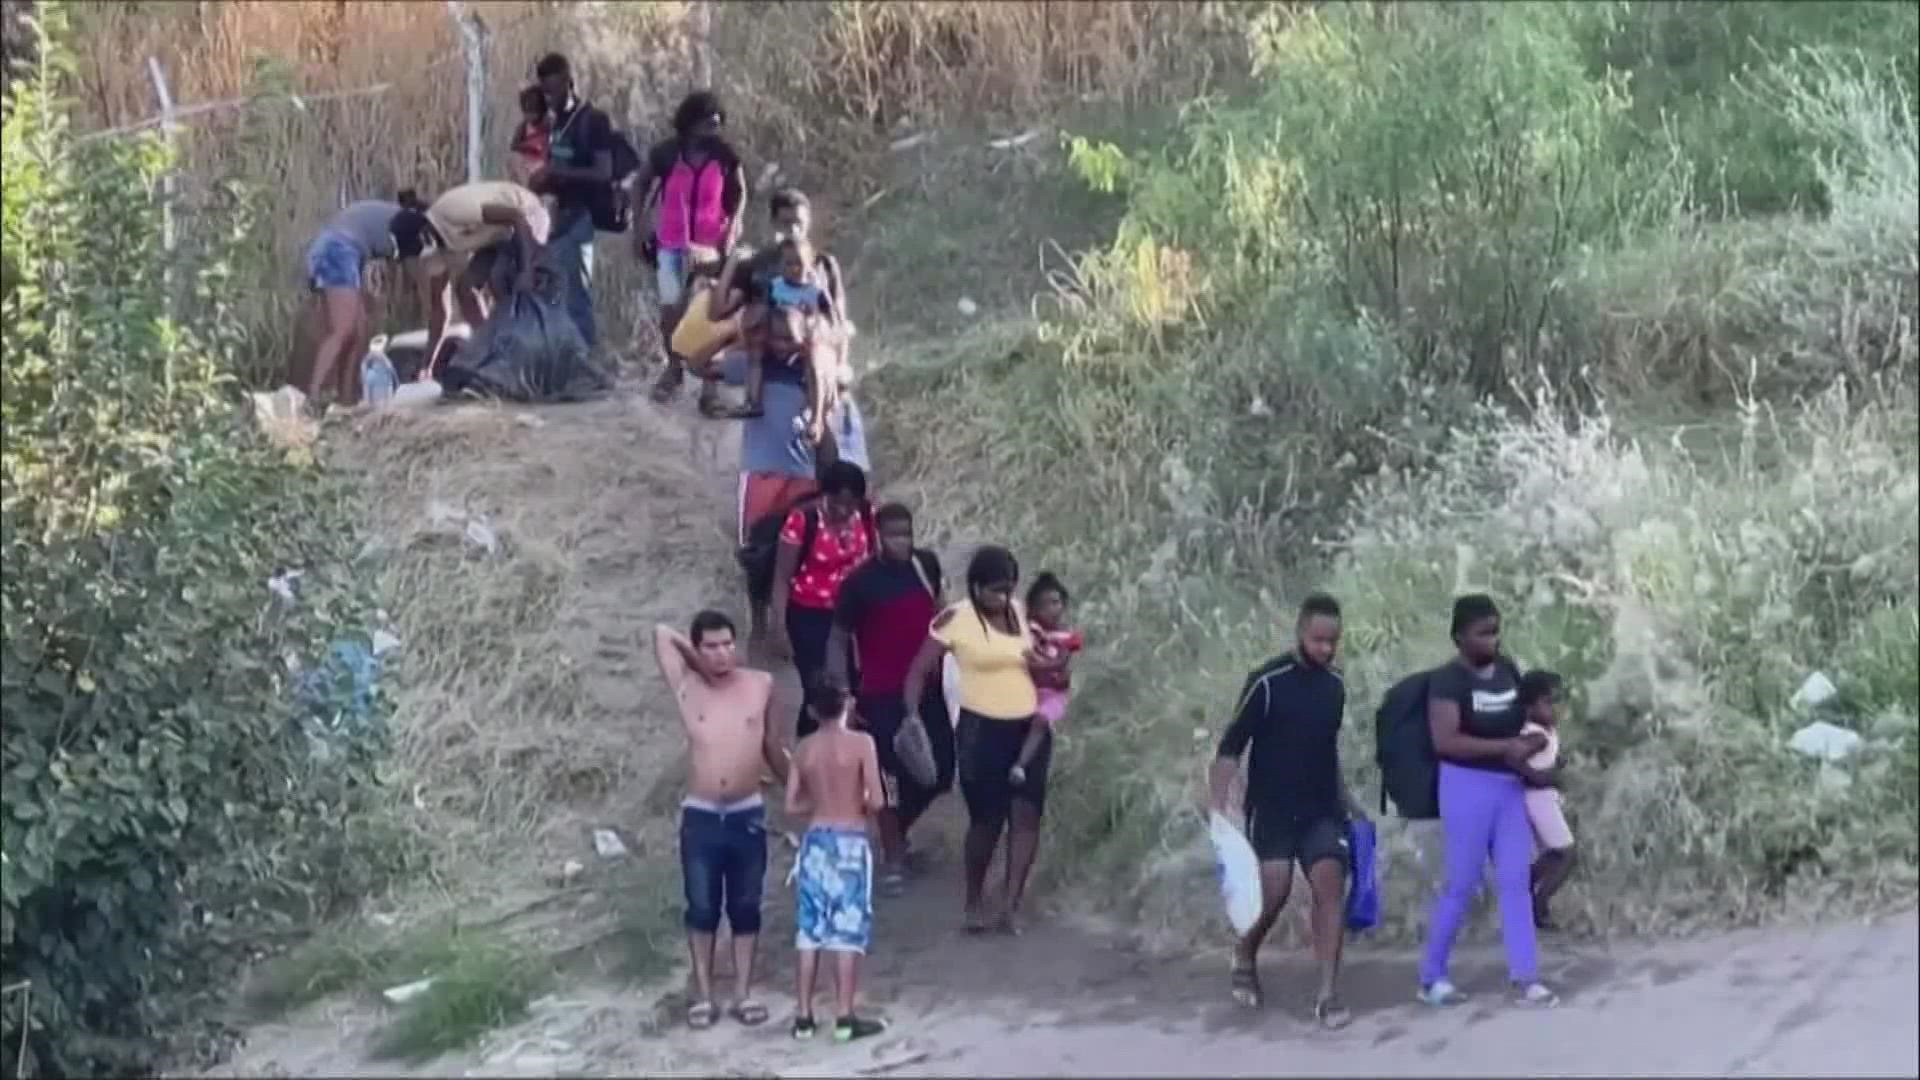 Migrants are walking through the knee-deep waters of the Rio Grande and building makeshift tents out of sticks.